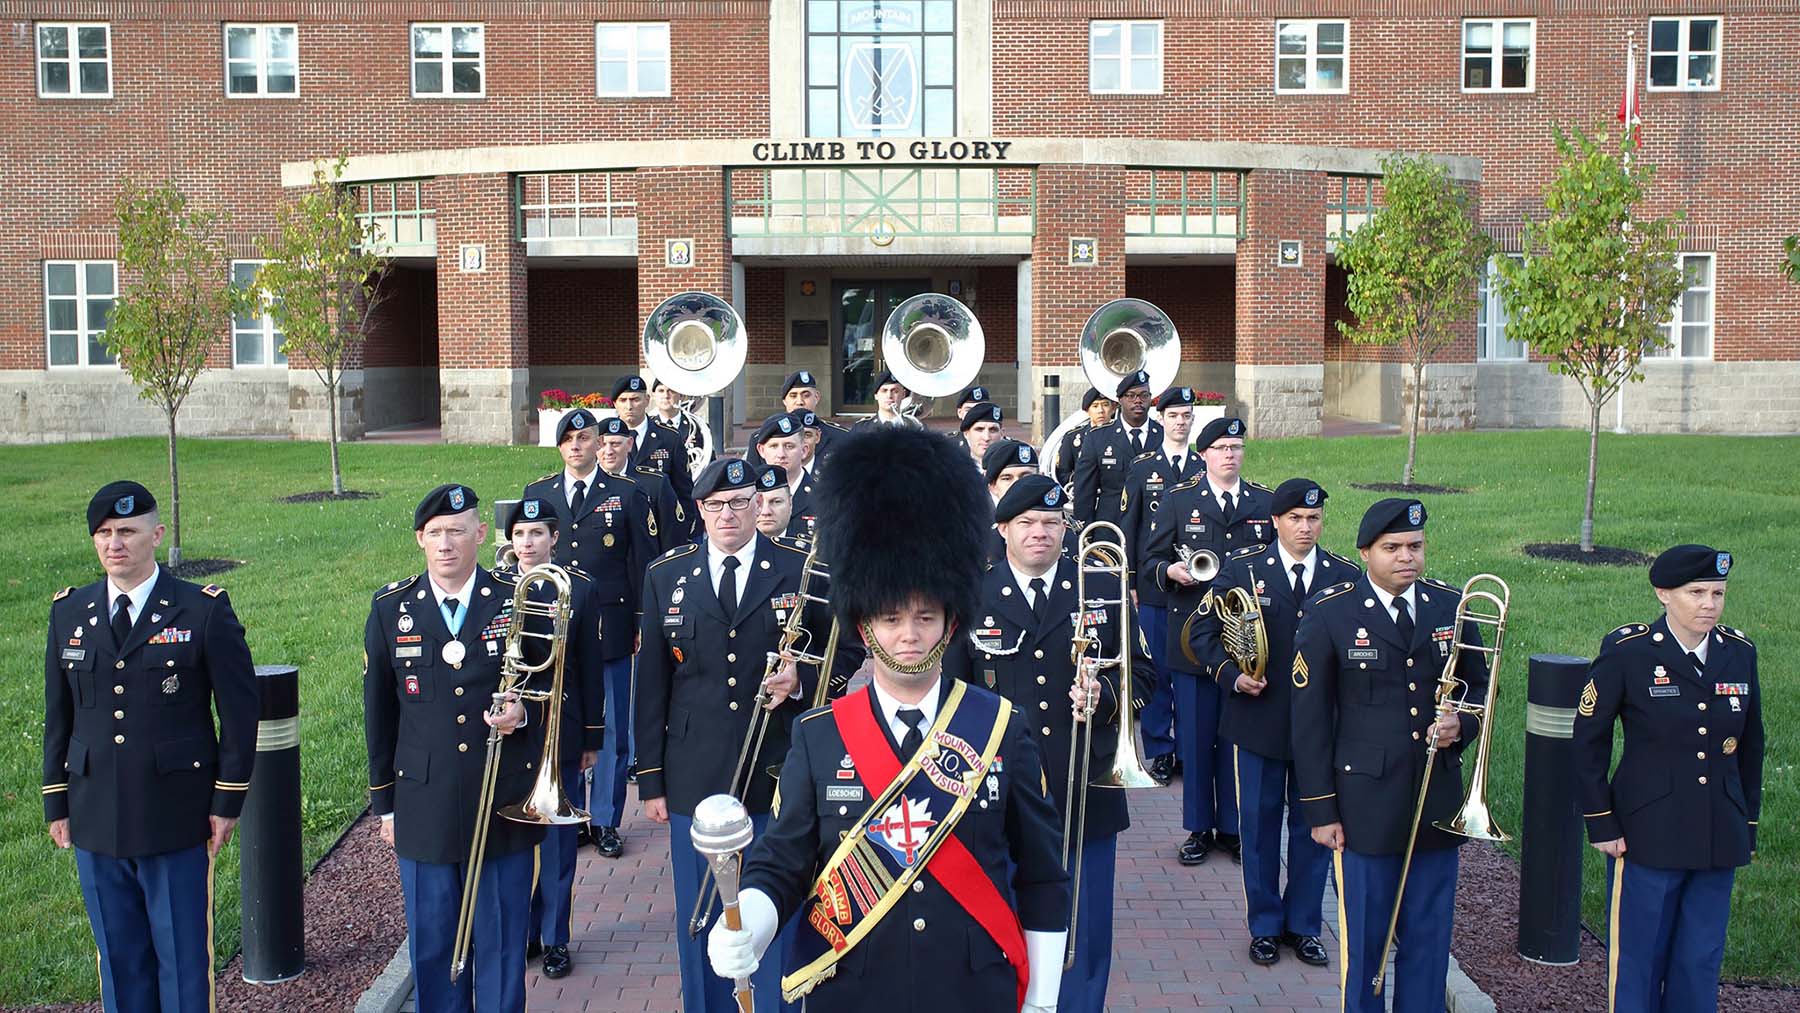 2022 publicity photo of the 10th Mountain Division Army Band in front of Hays Hall